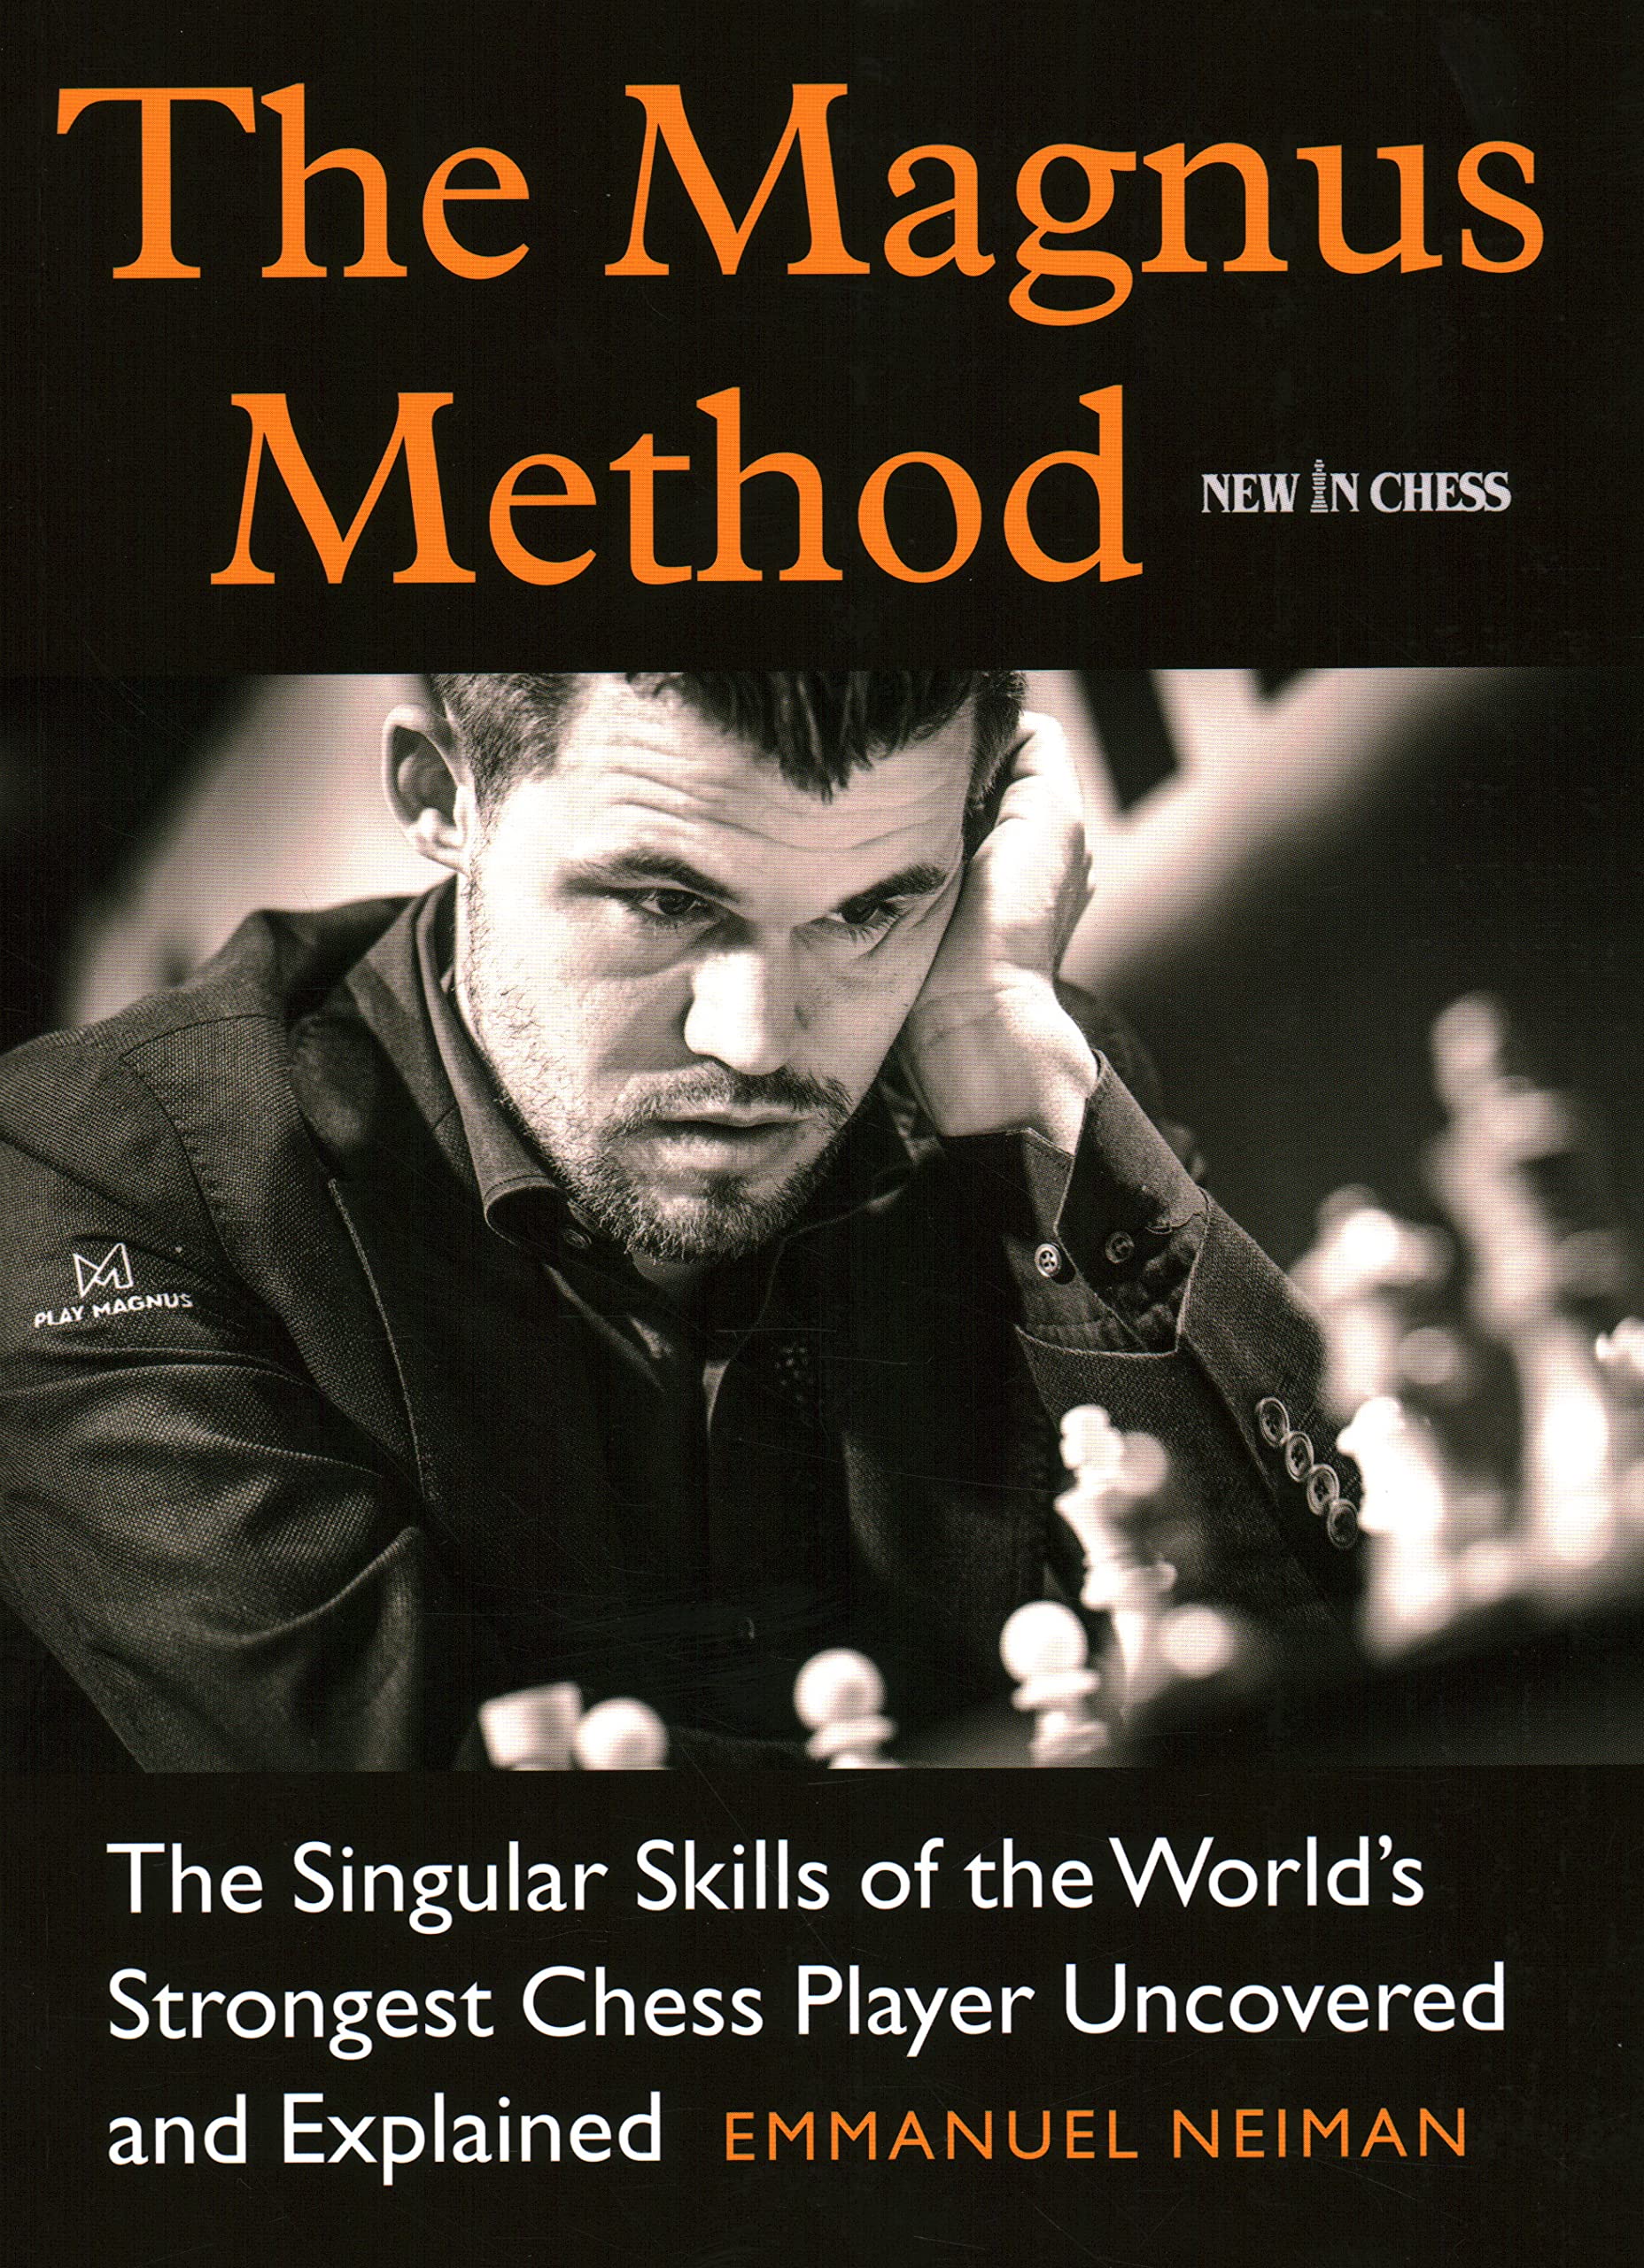 The Magnus Method: The Singular Skills of the World's Strongest Chess Player Uncovered and Explained, Emmanuel Neiman, New In chess (9 Oct. 2021), ISBN-13 ‏ : ‎ 978-9056919689